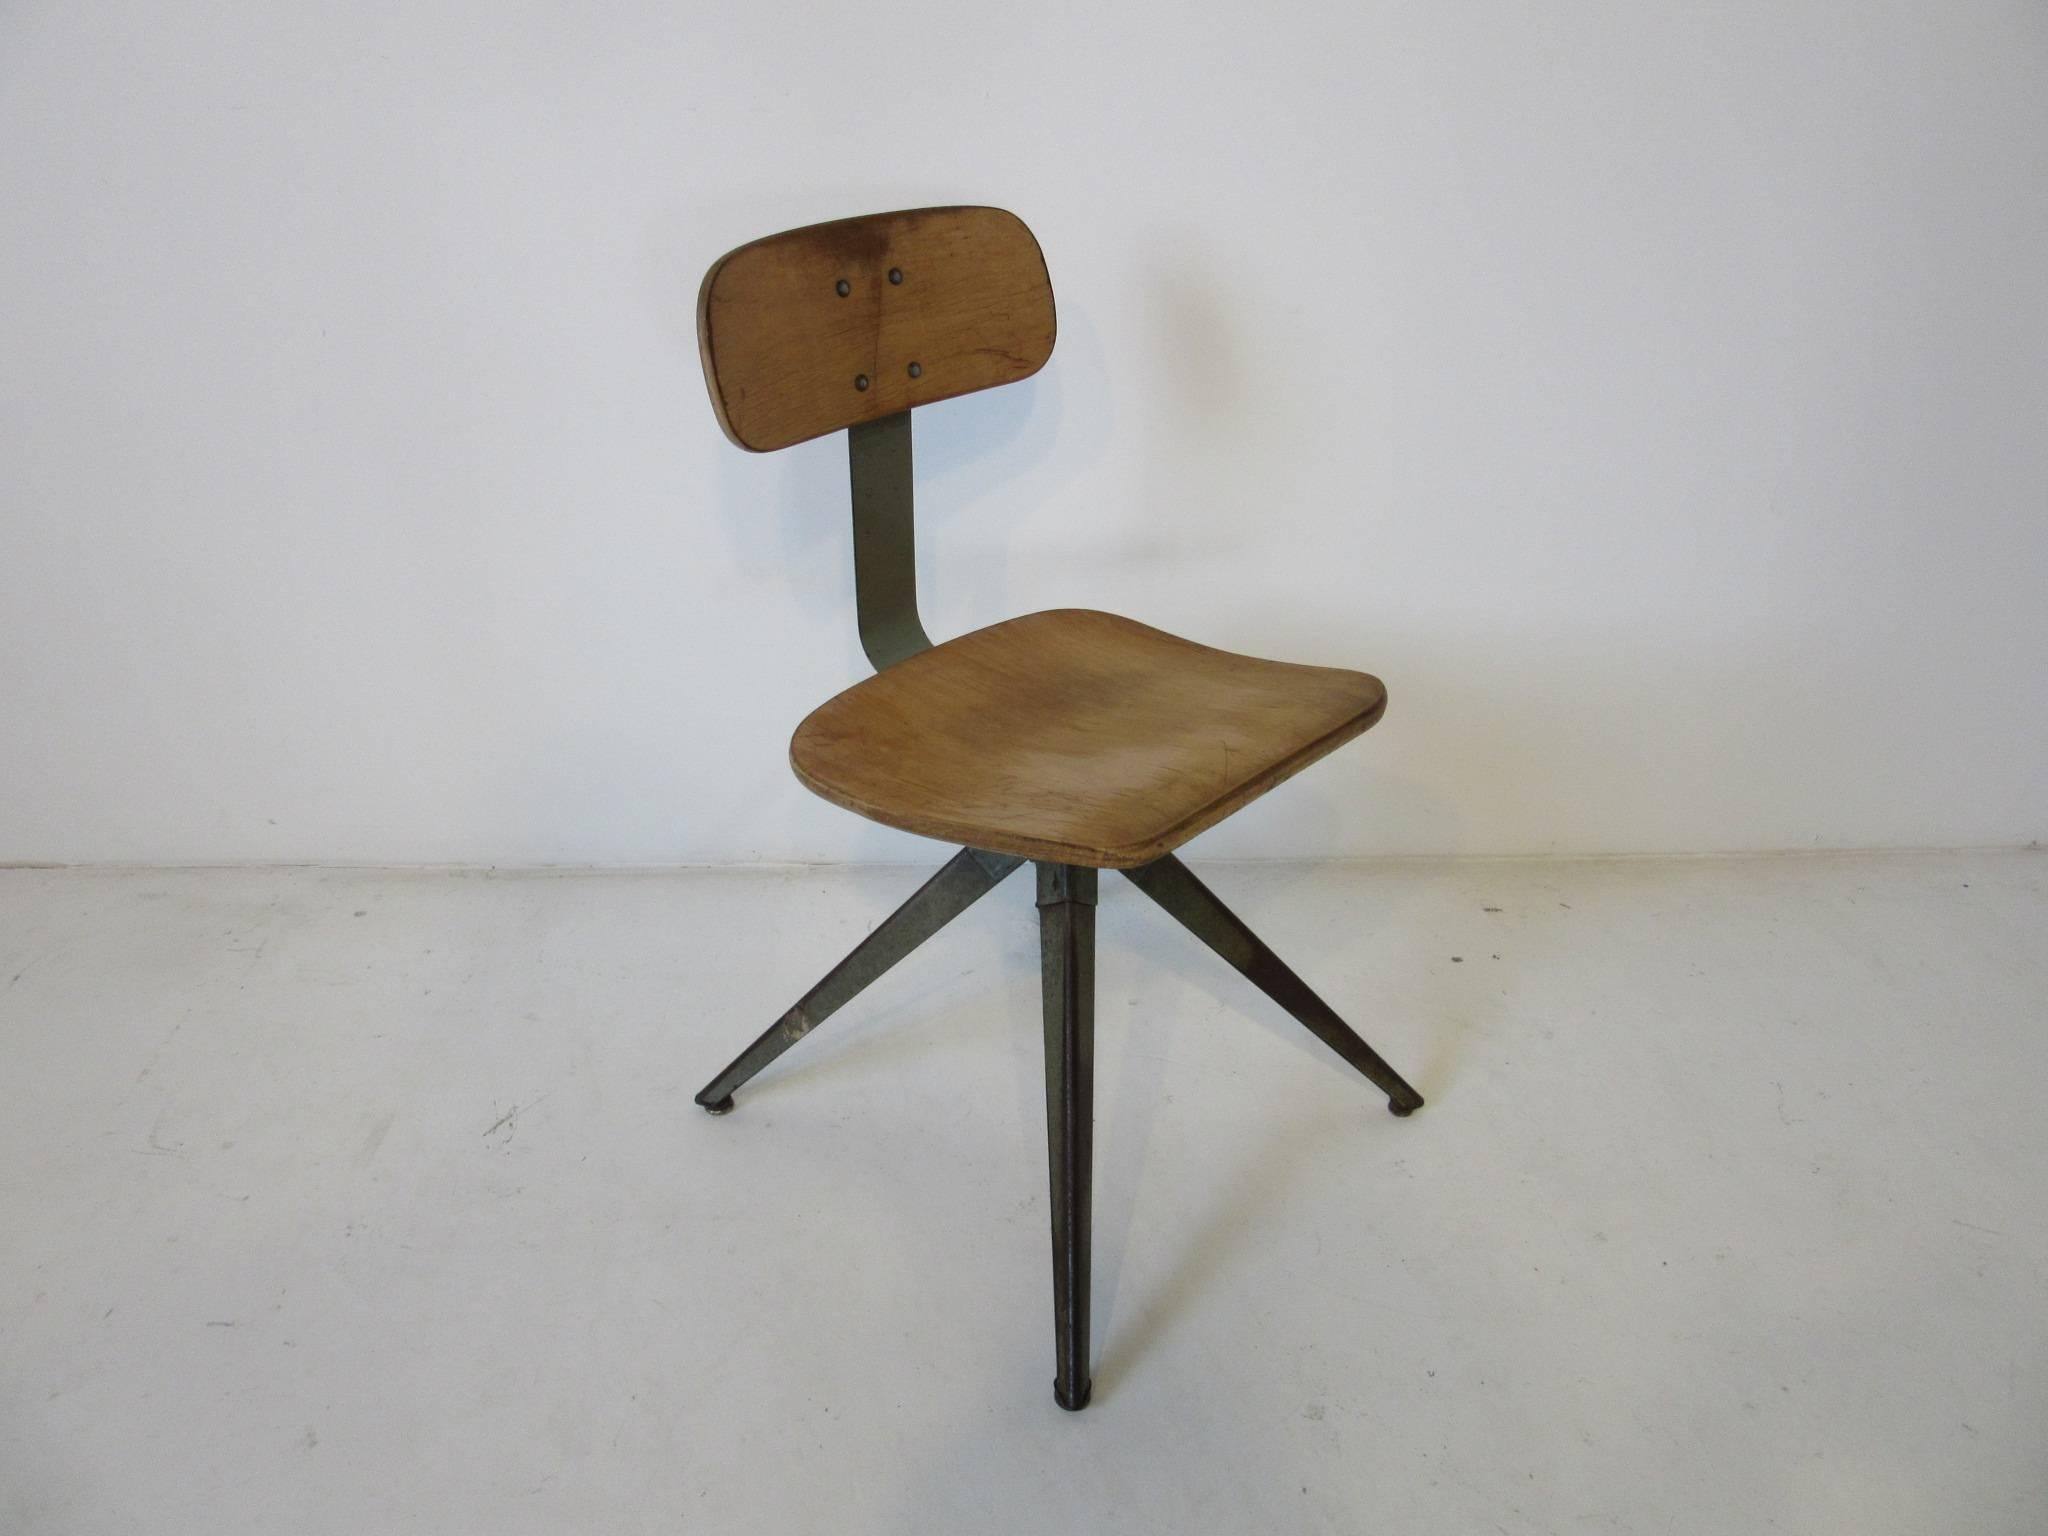 A splayed leg and metal spine styled desk / side chair with molded plywood seat back and bottom, foot pads are attached to each leg to ensure stability. A great industrial form in the manner of Odelberg Olsen and Prouve.